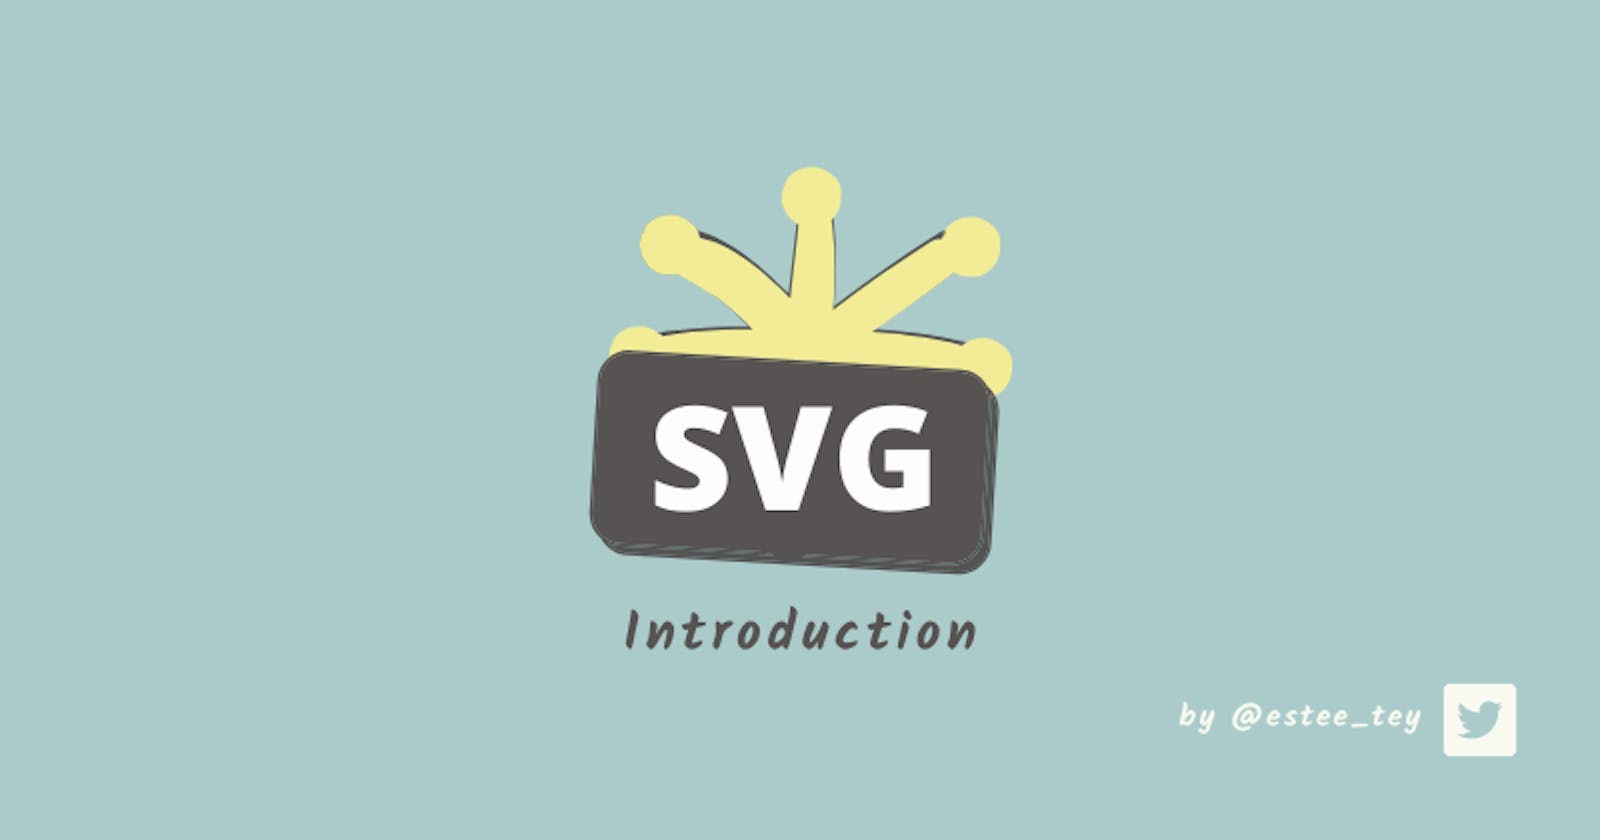 Introduction to Scalable Vector Graphics (SVG)